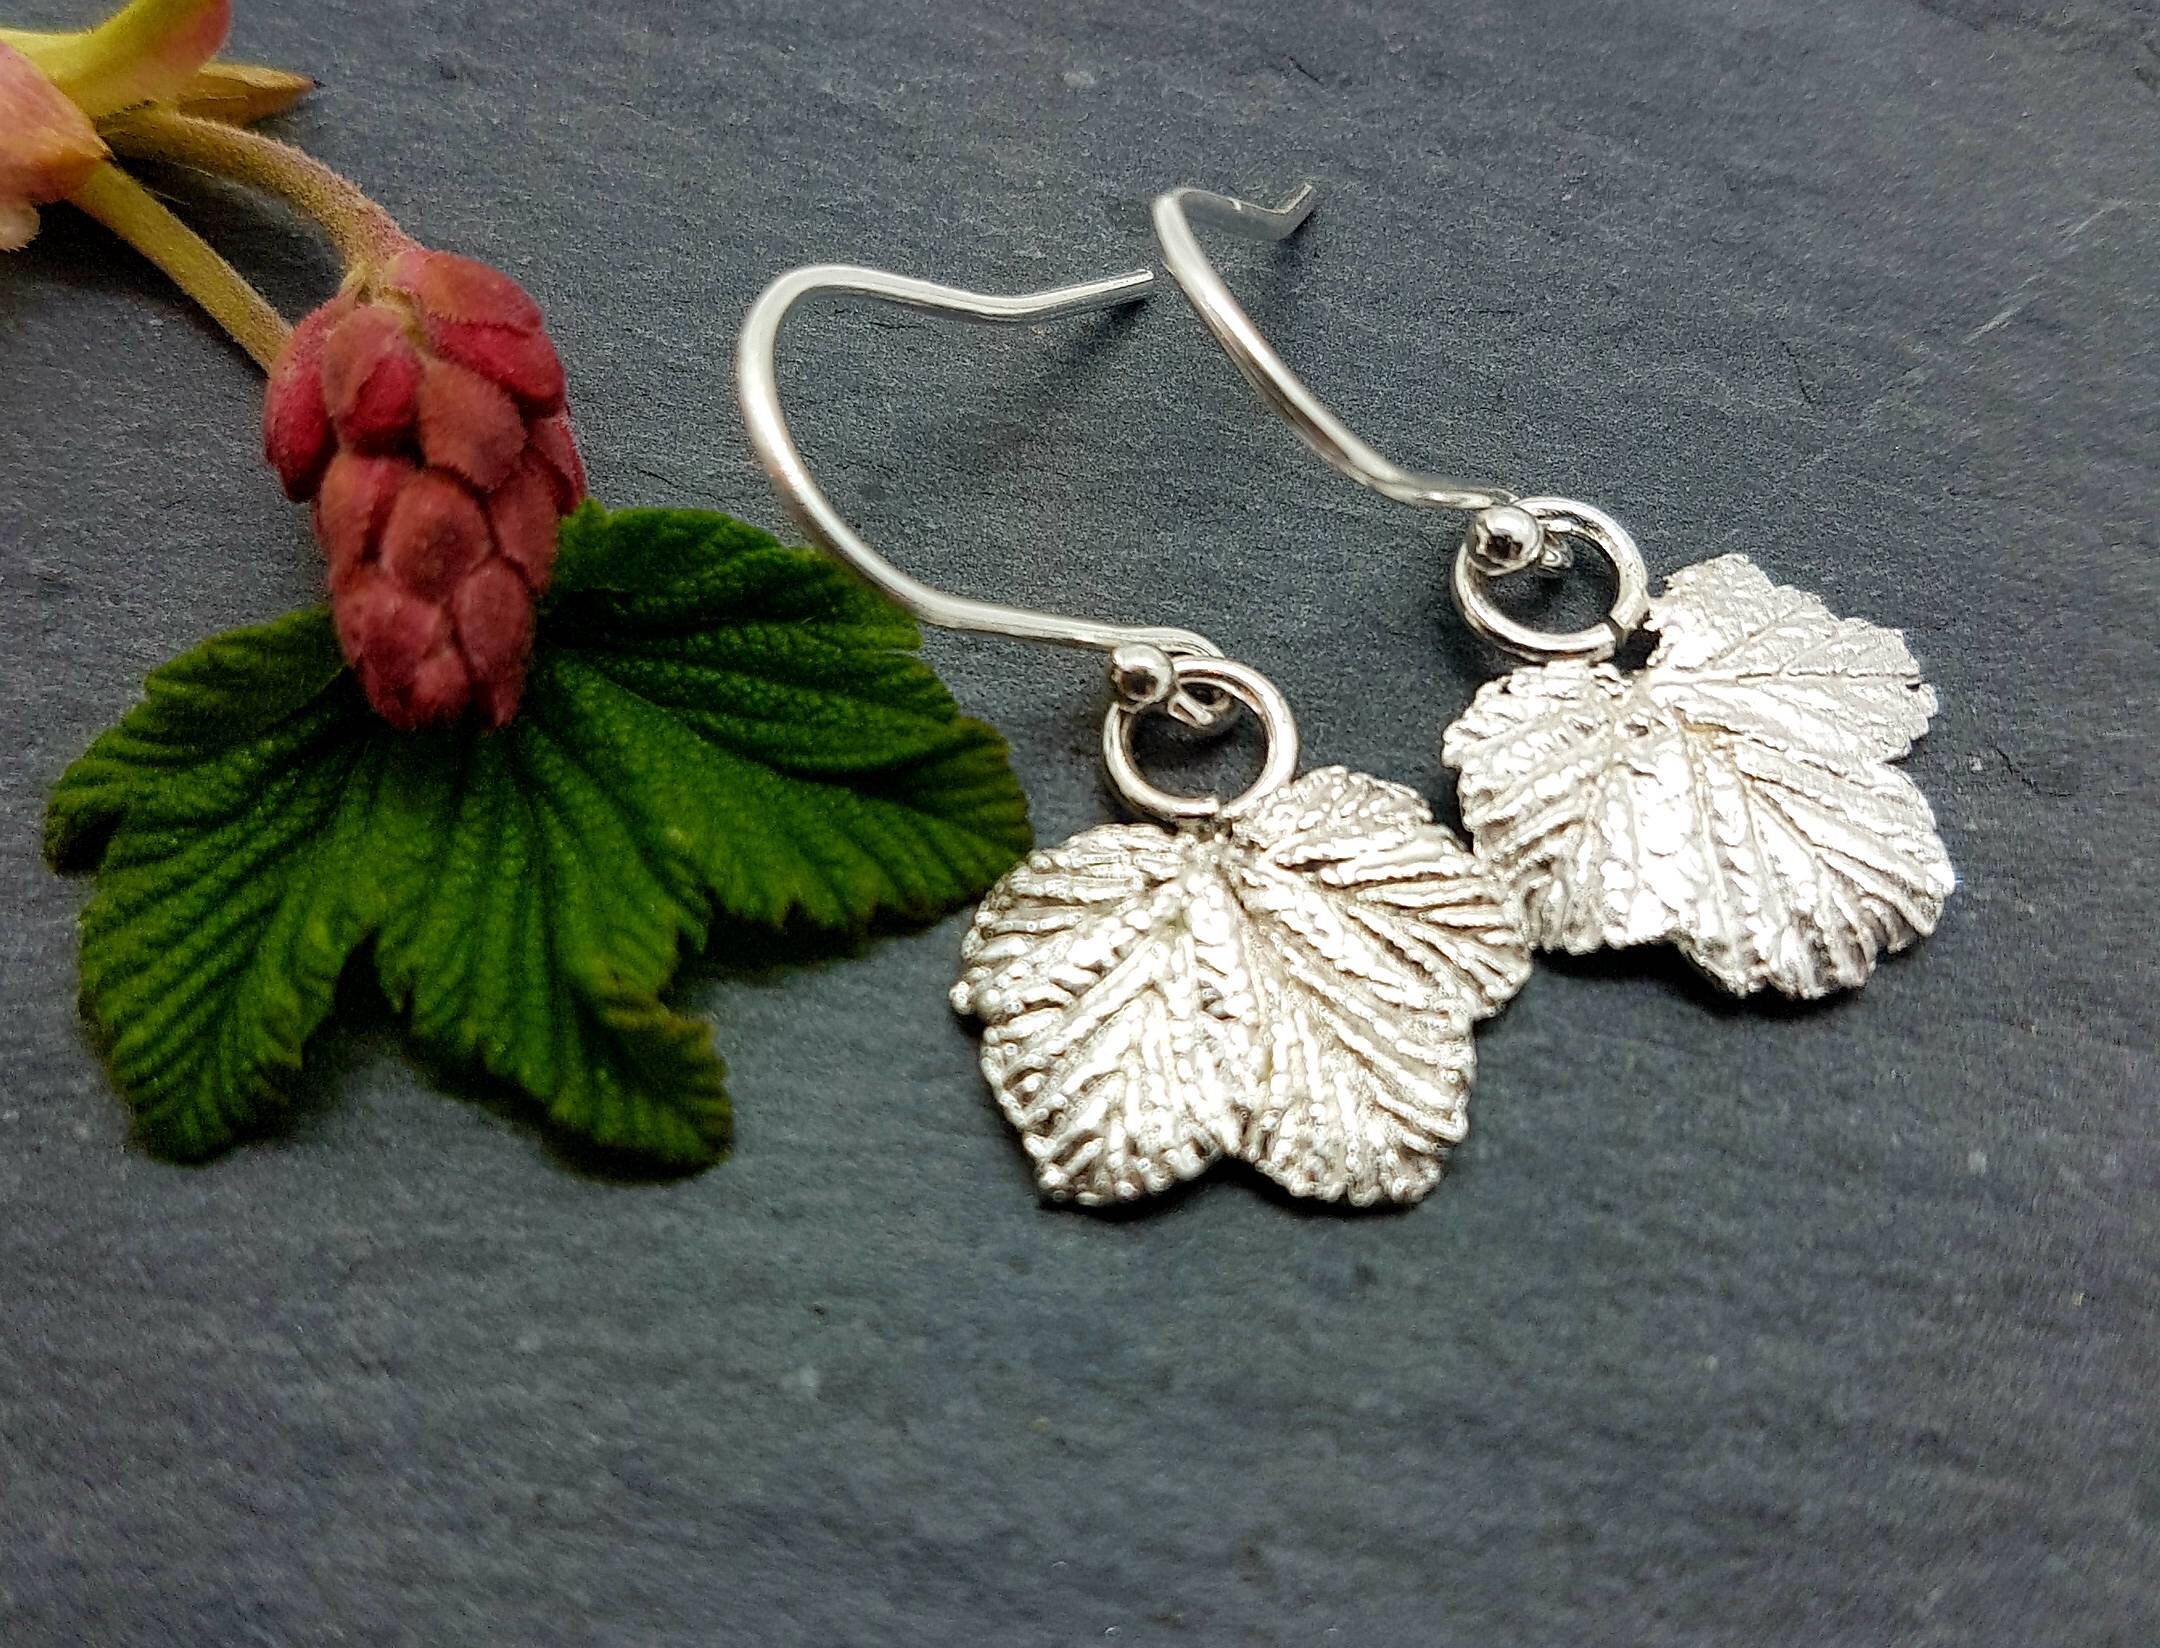 Silver Leaf Earrings, Silver Drop Real in Drops, Black Currant Leaf, Recylcled Silver, UK Made, Plant Lover Gift